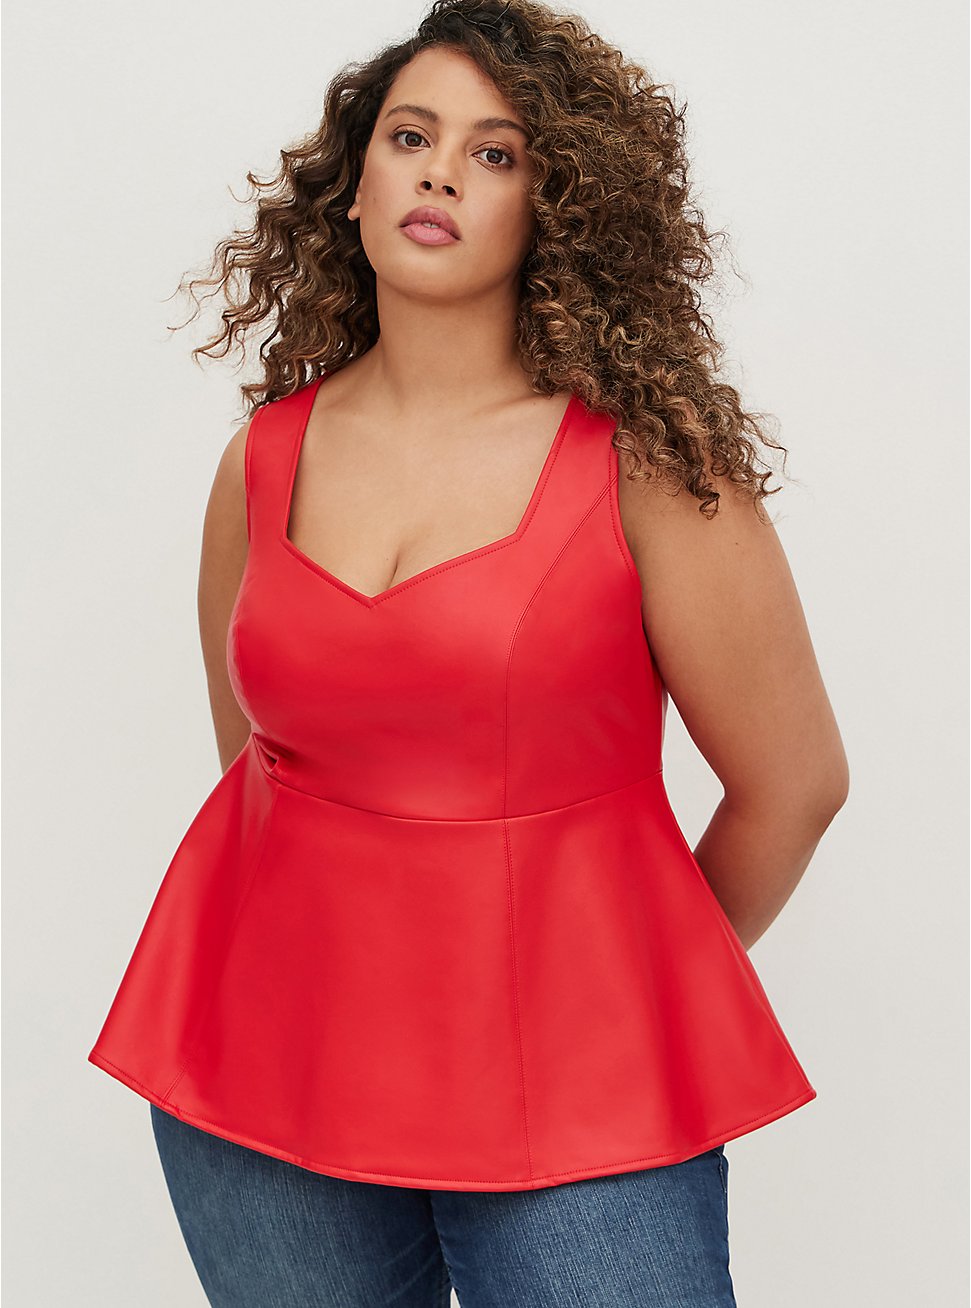 Plus Size Peplum Tank - Faux Leather Red, , hi-res